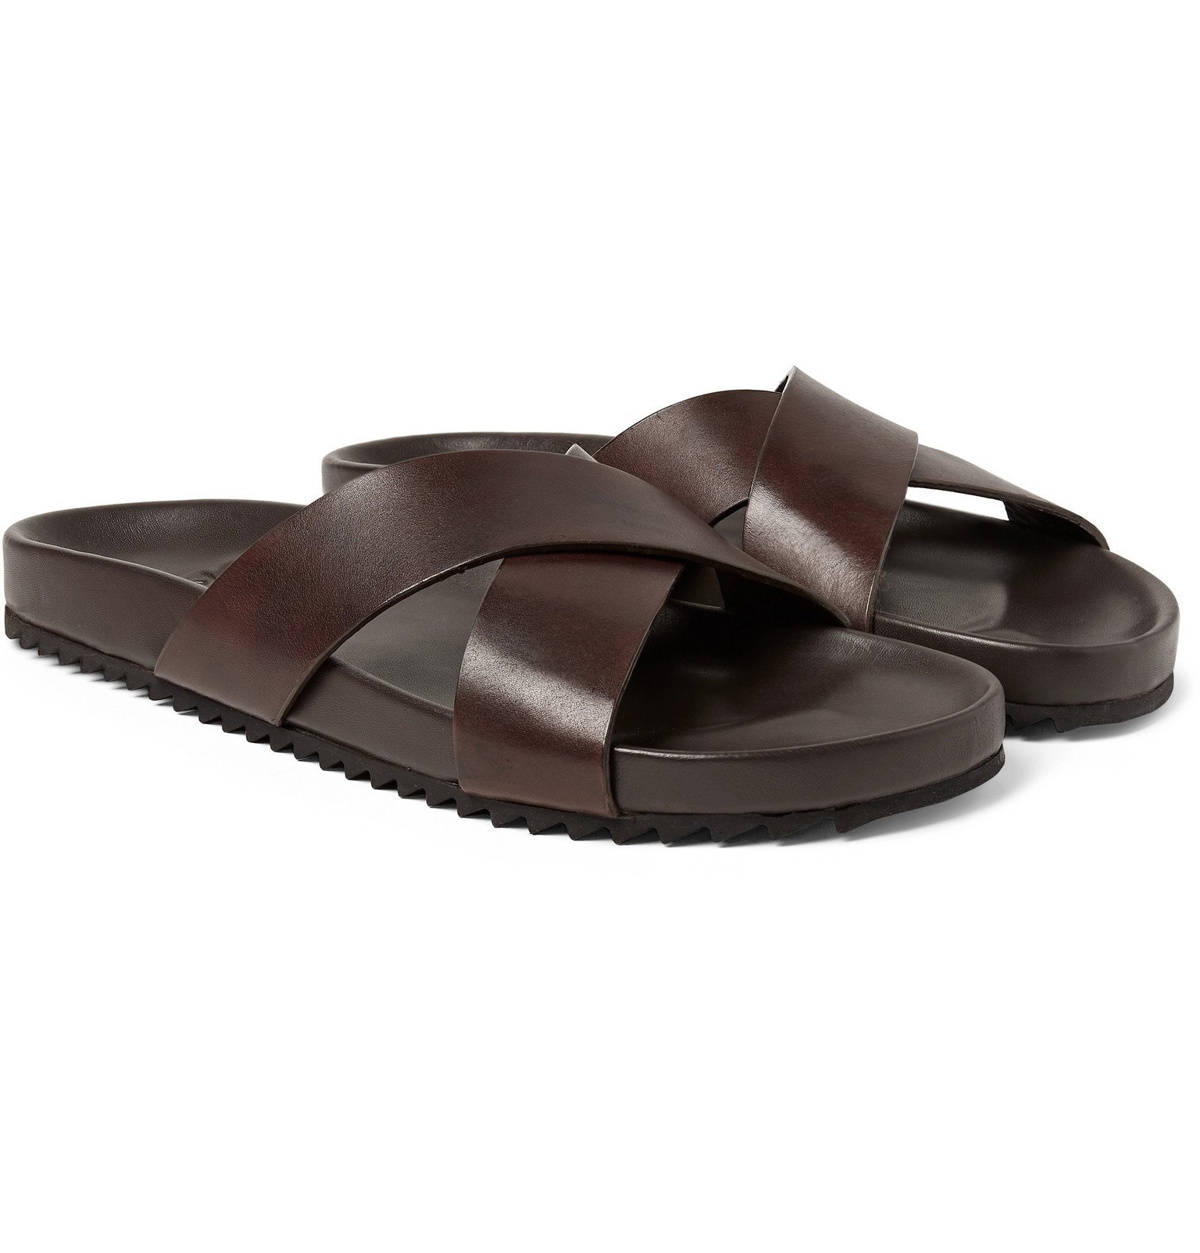 Grenson - Leather Sandals - Brown